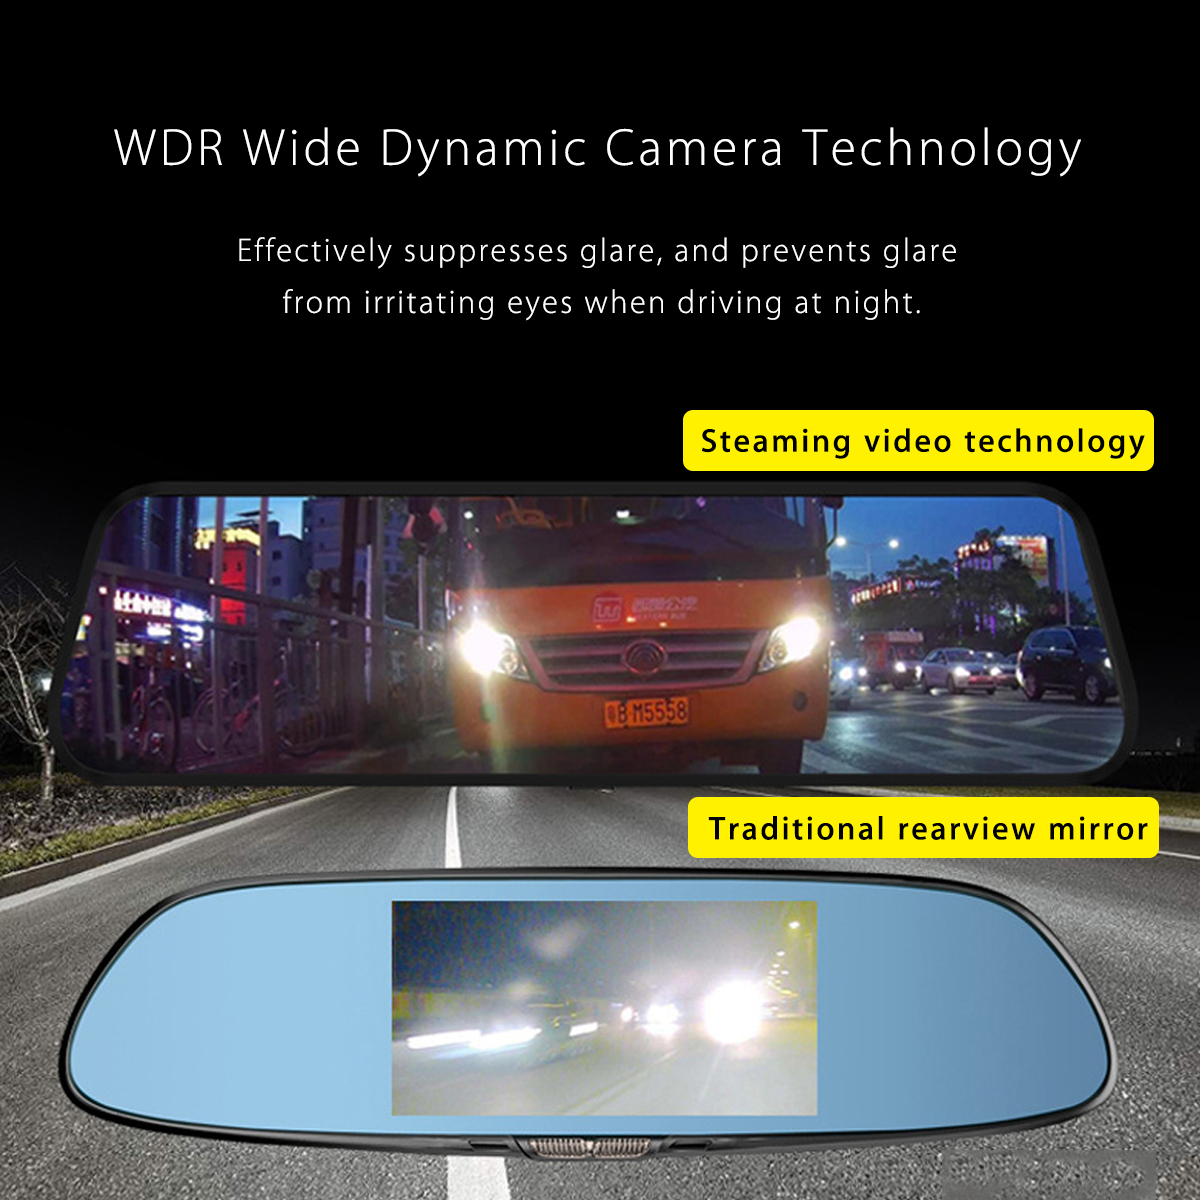 10-Inch-1080P-Touch-Screen-Dual-Lens-Car-Rearview-Mirror-DVR-Safety-Driving-Camera-1398871